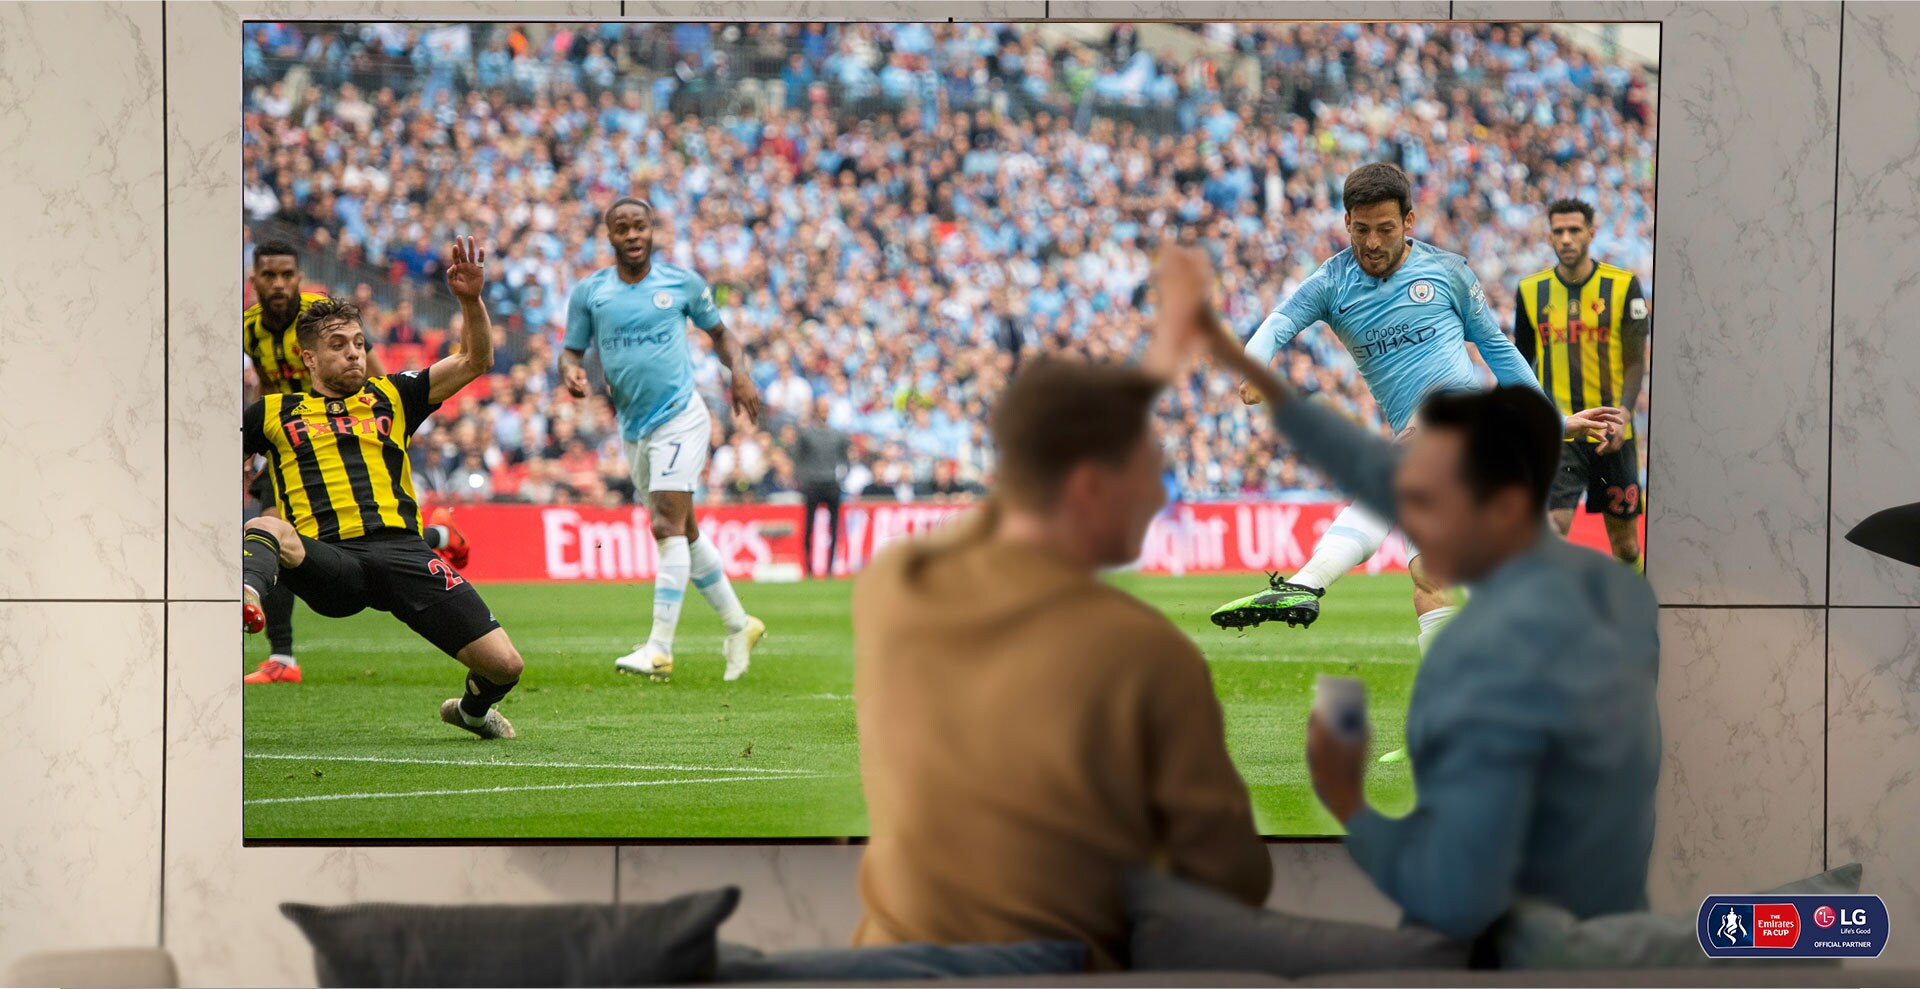 Two men are cheering while watching a soccer game on Nanocell TV in the living room. Below that, the image quality is improved through NanoCell technology.